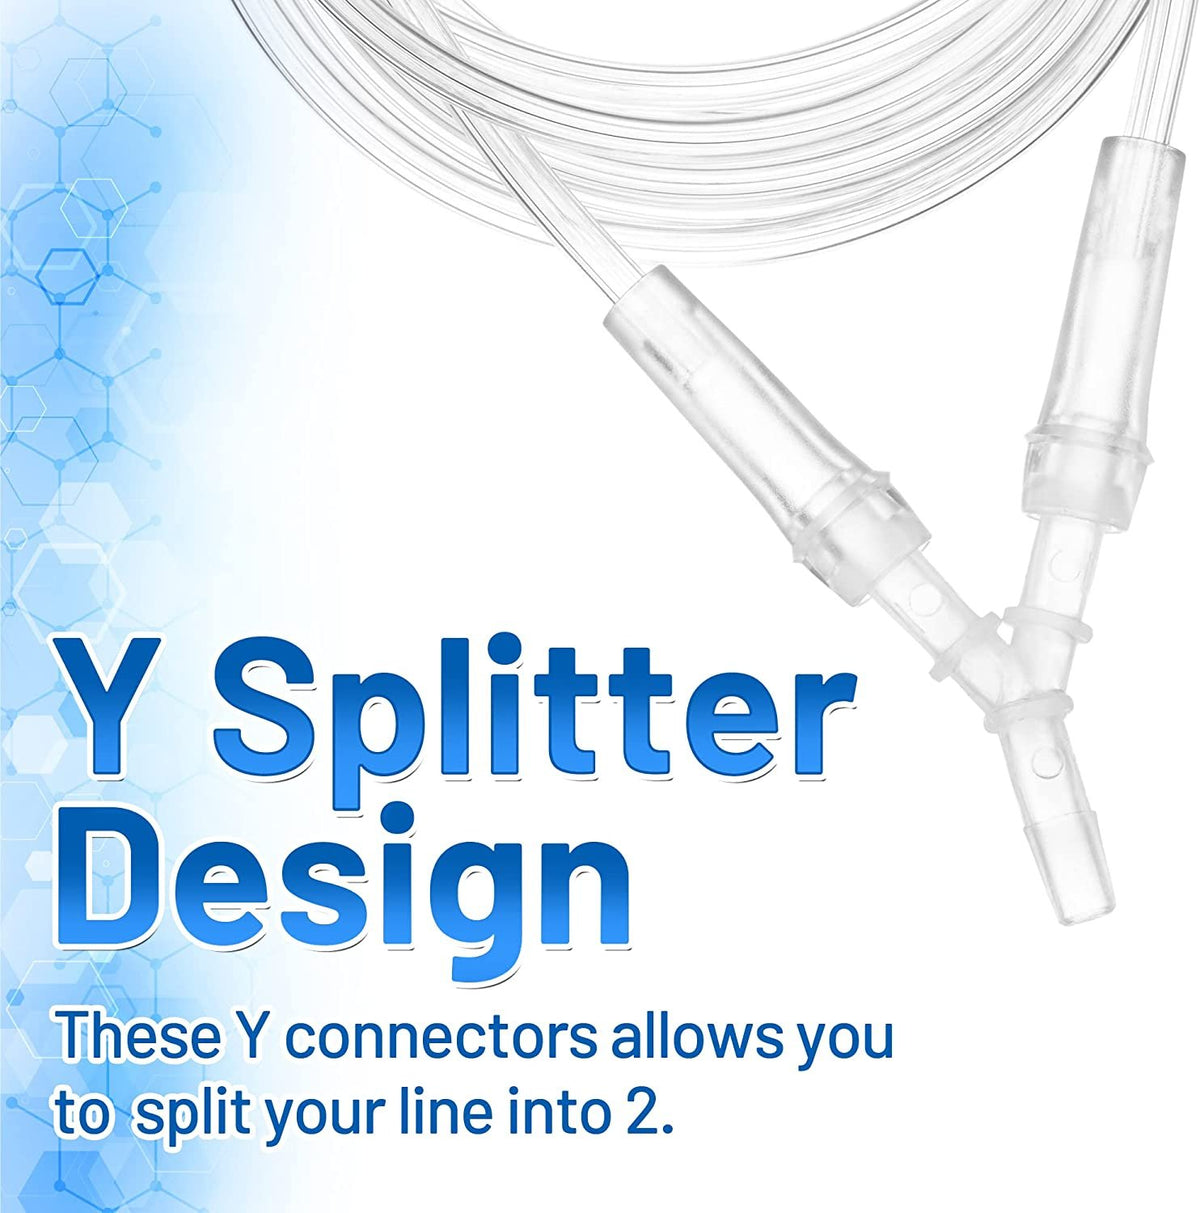 Oxygen Tubing Connectors Y Splitter - 5-Pack - Oxygen Therapy, Cannula Connector Compatible with Standard Oxygen Tubing, Ideal for Home and Medical Use